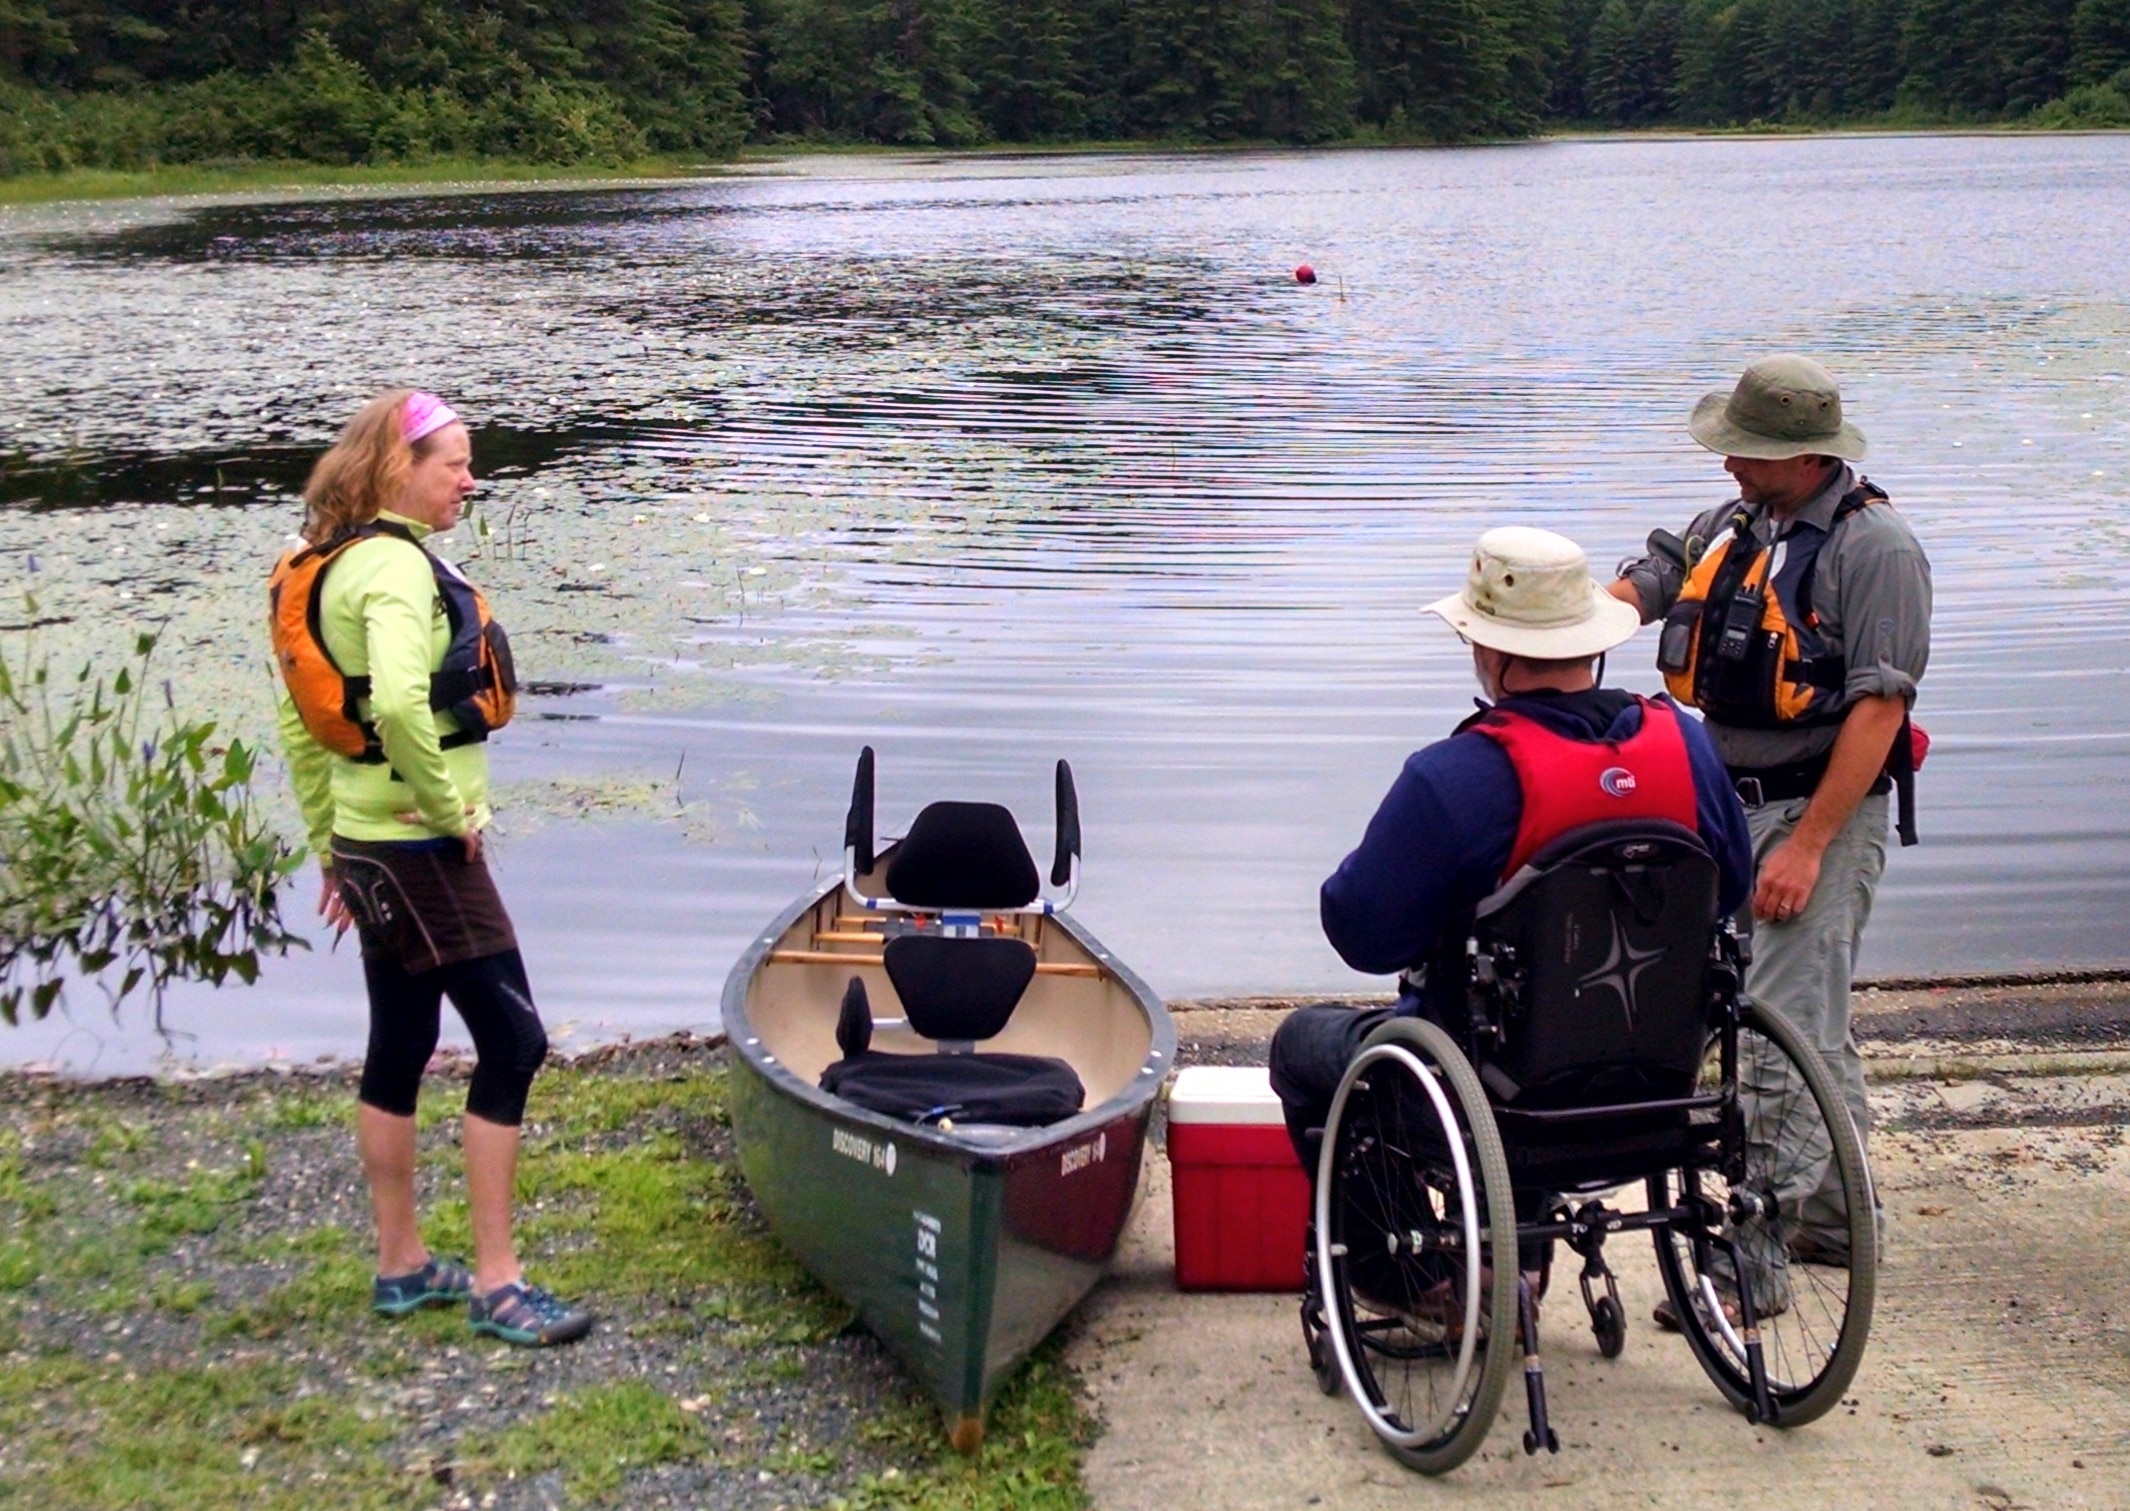 A paddler in a manual wheelchair sits next to a canoe with an adaptive seat. A cooler is next to the canoe and two program staff are nearby.